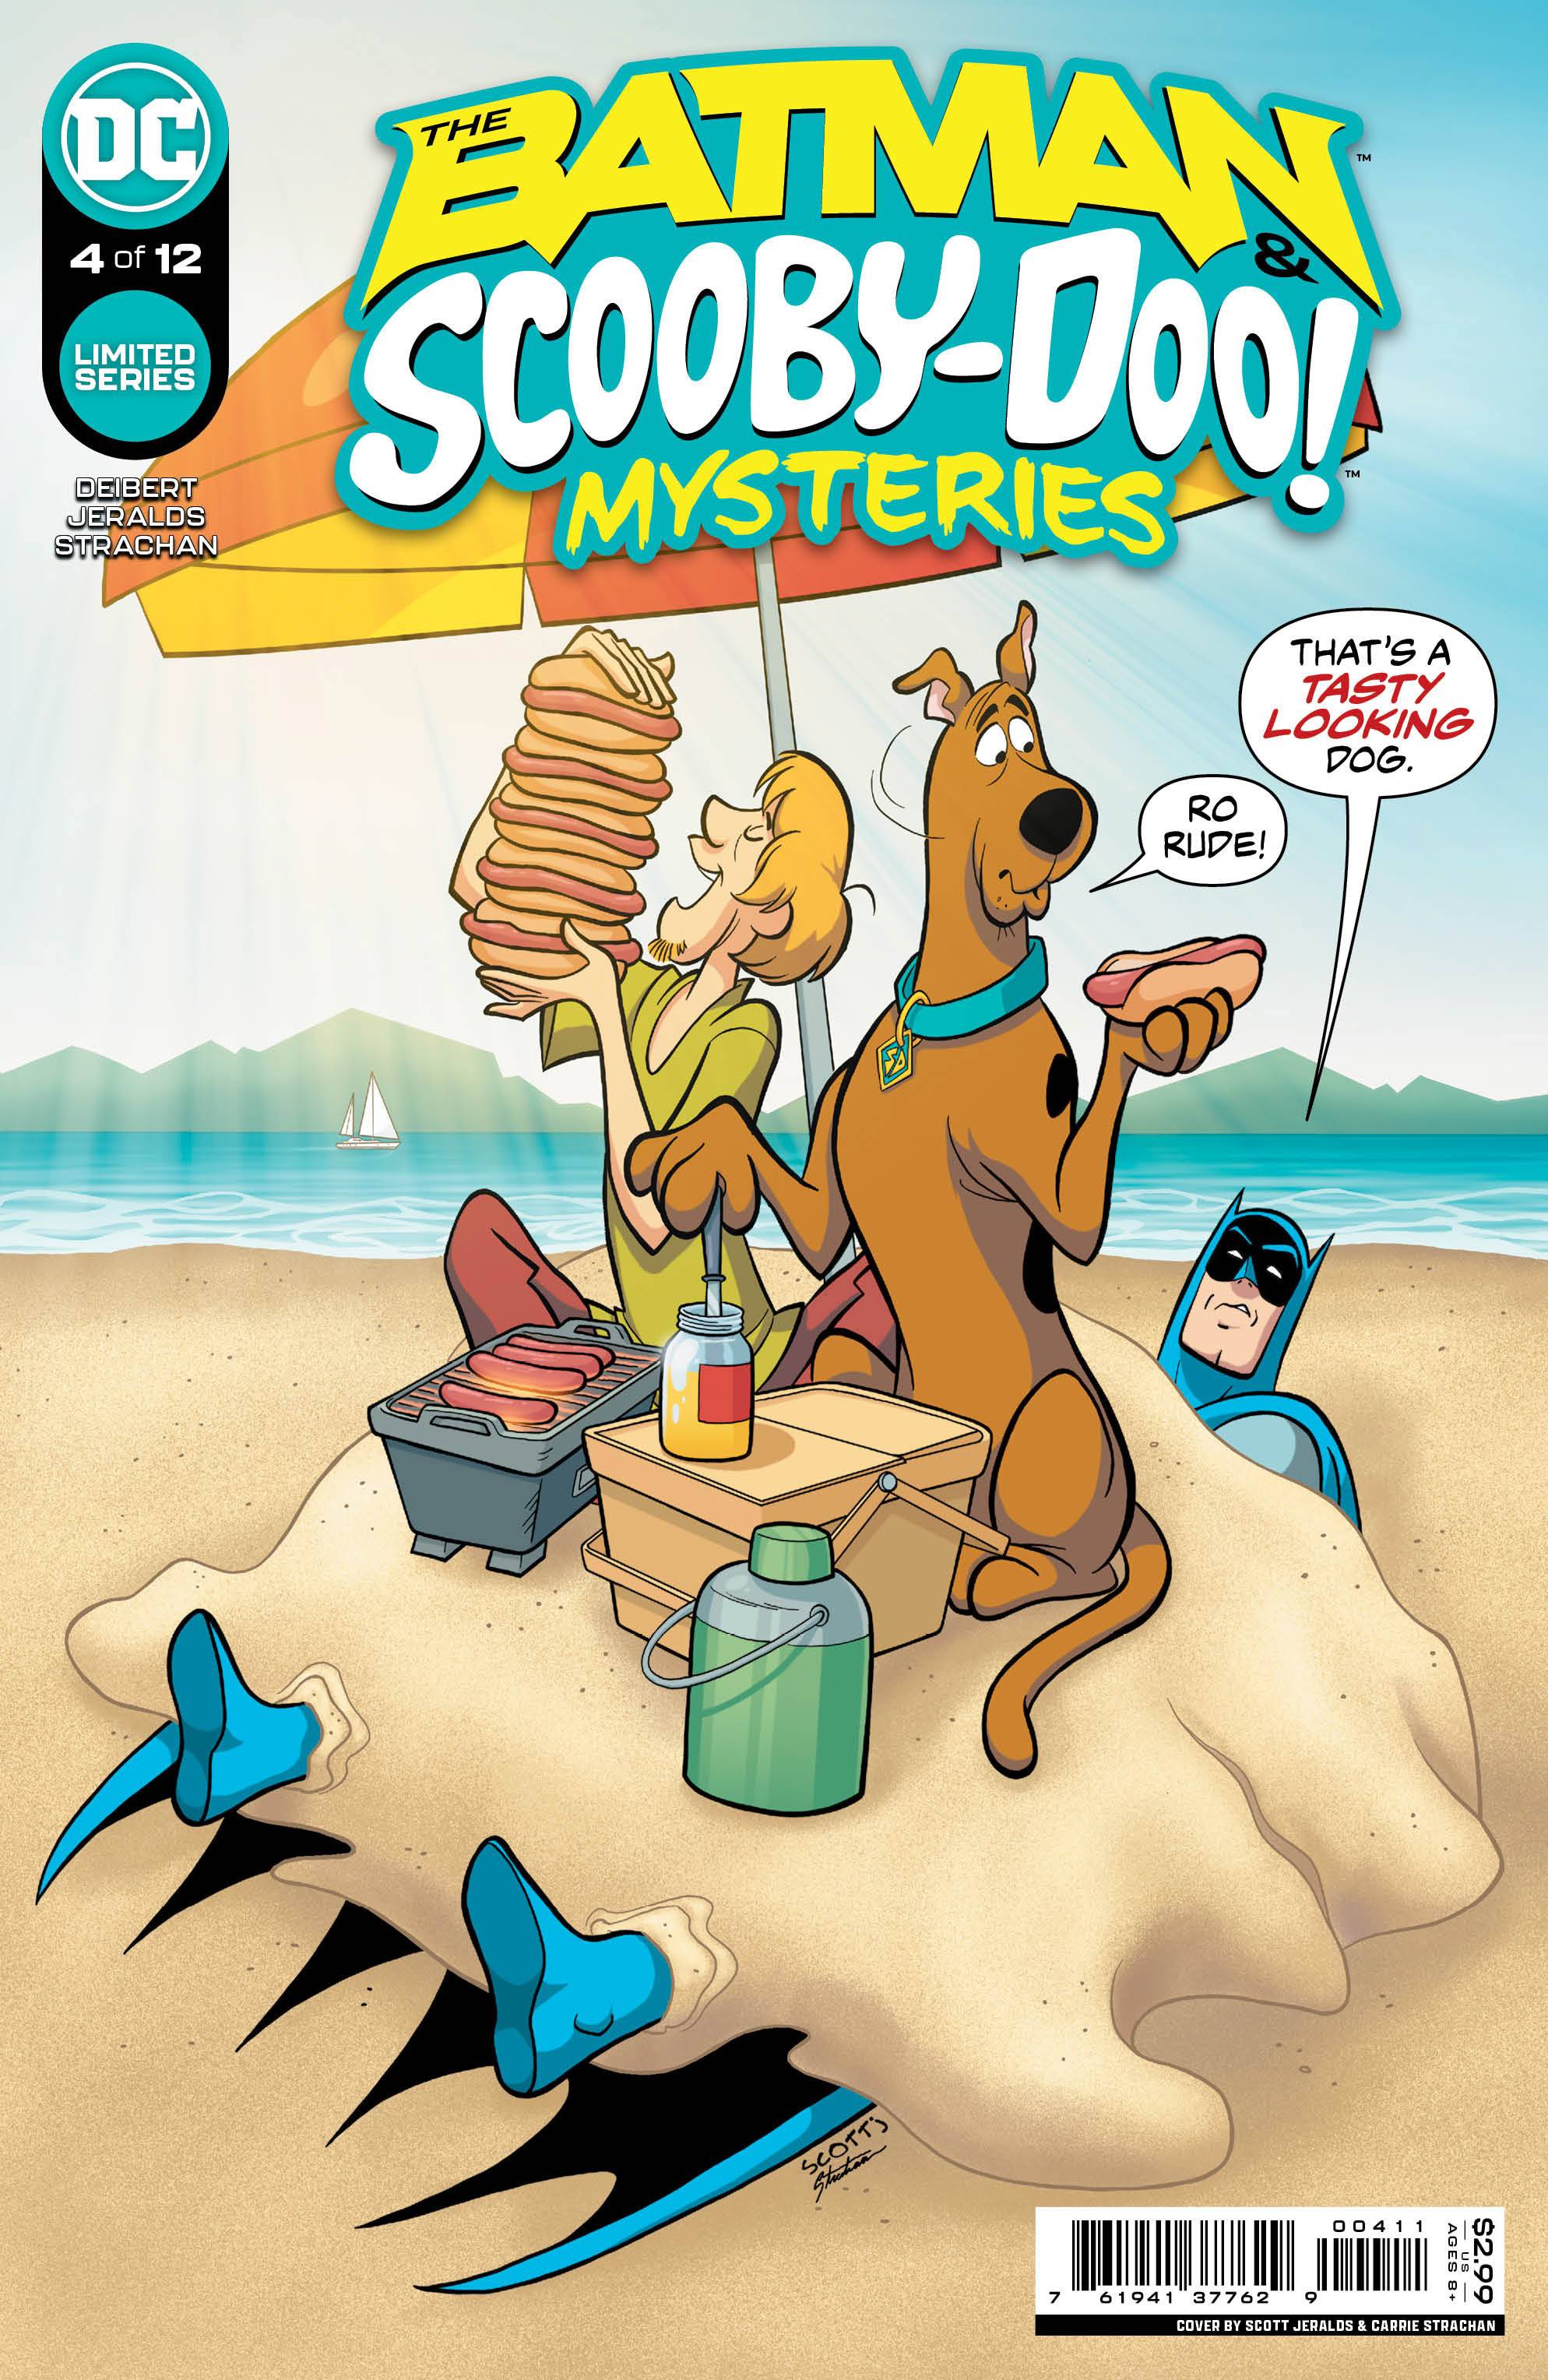 BATMAN AND SCOOBY DOO MYSTERIES #4